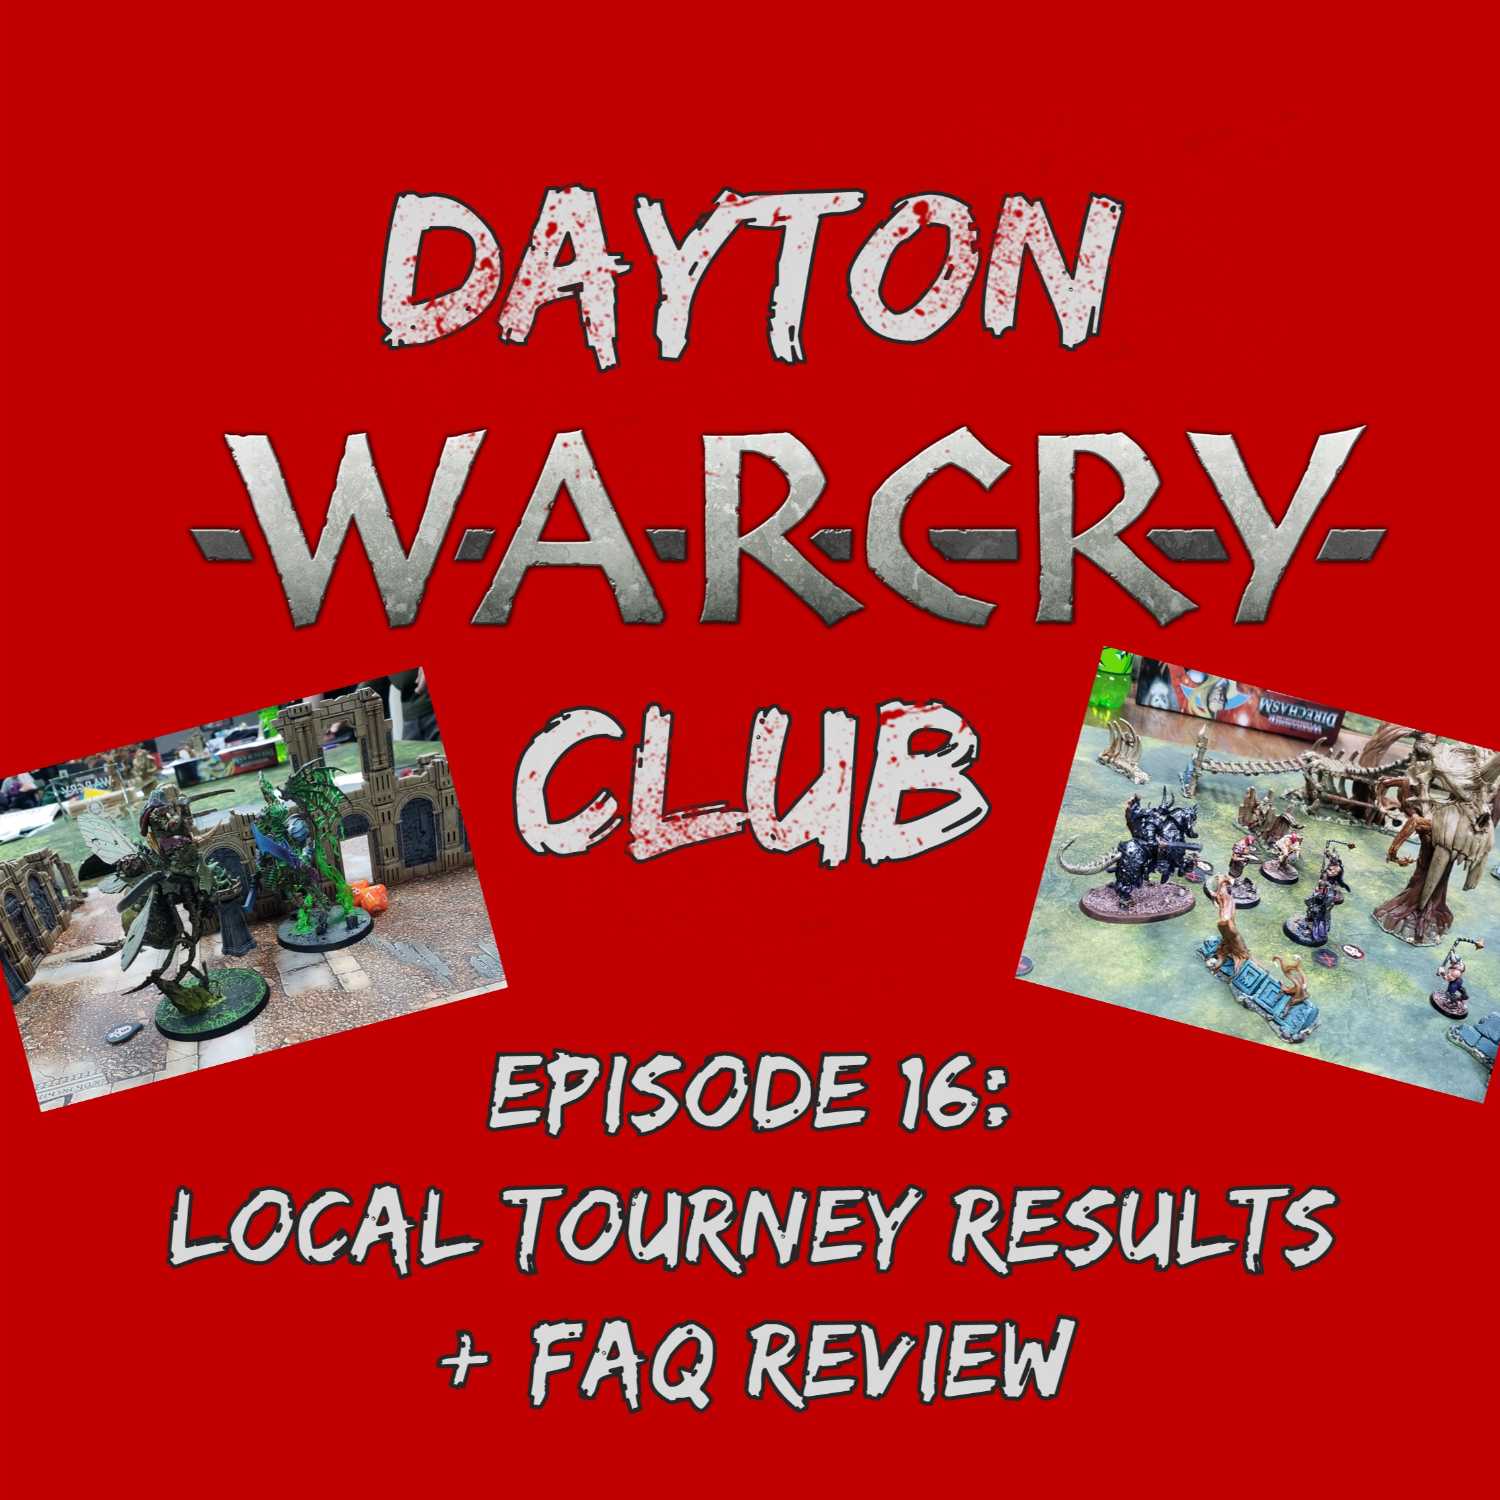 Dayton Warcry Club Episode 16: Local Tourney Results + FAQ Review